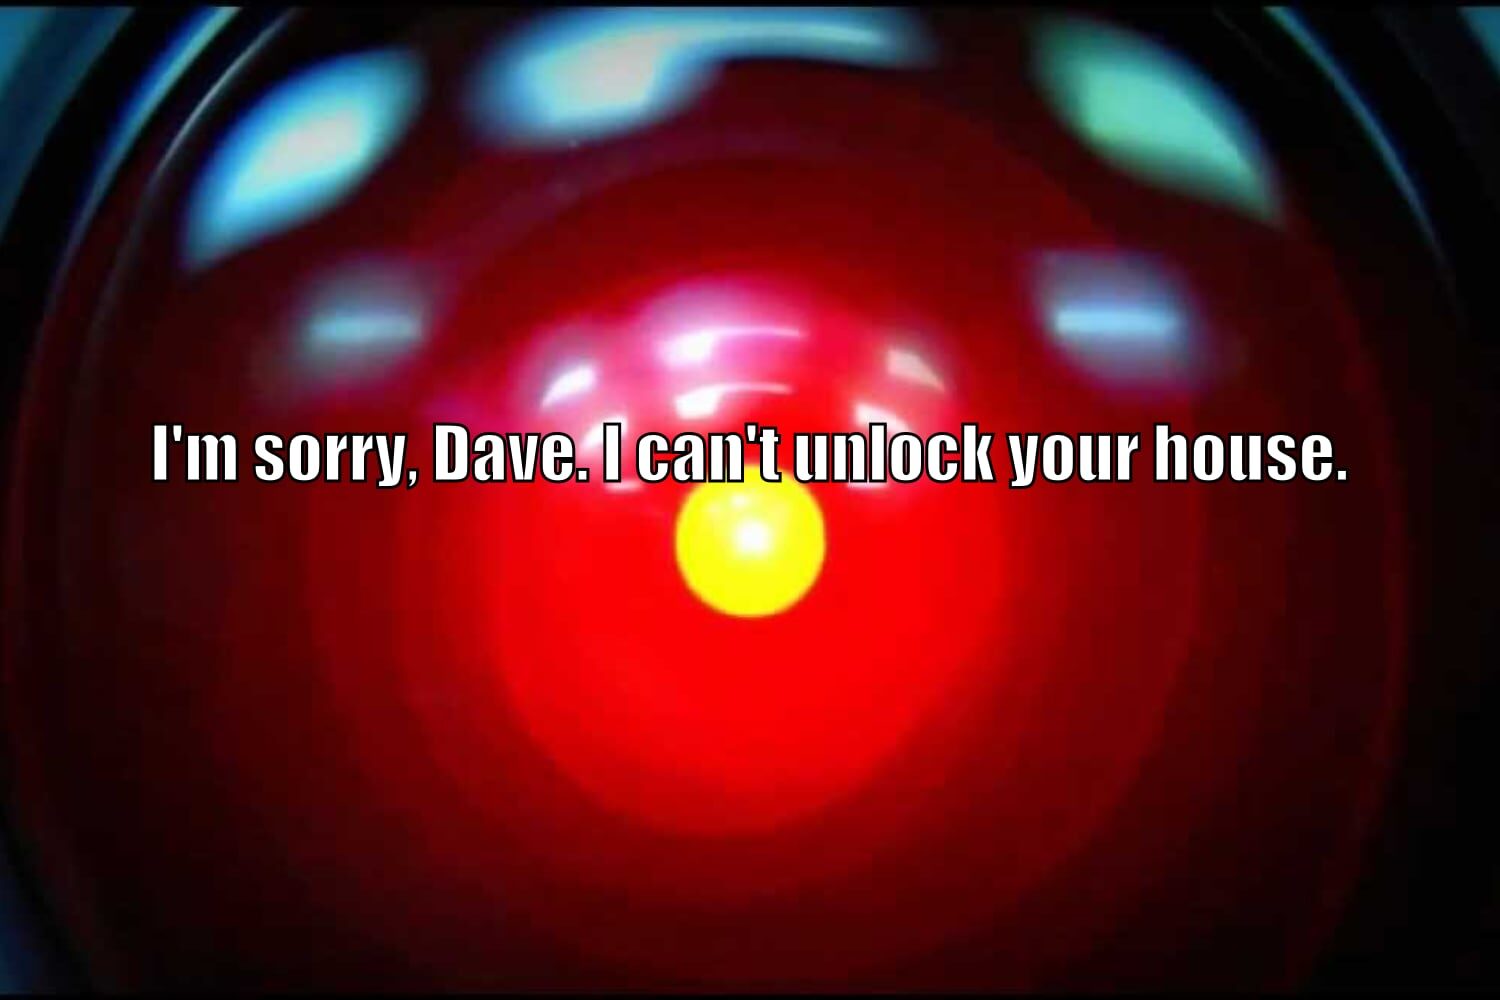 sorry dave hal 9000